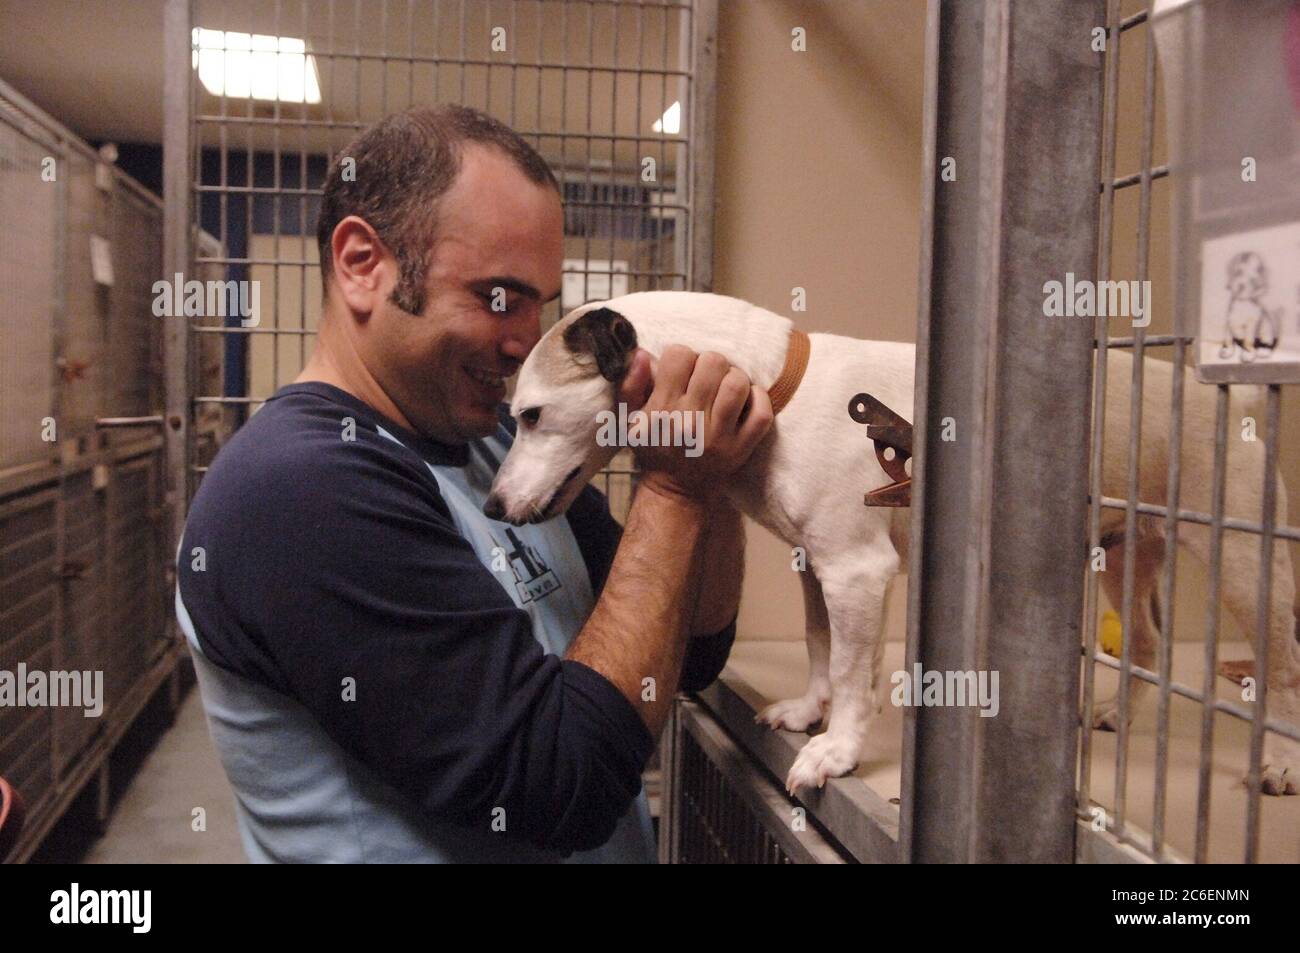 Austin, Texas September 13, 2005: Marciello Fonte of the no-kill Animal Haven pet shelter in New York City, looks over the animals at the Austin-Travis County Humane Society that will be shipped to New York to make room for more Hurricane Katrina-evacuated pets in the Texas shelter. Stock Photo